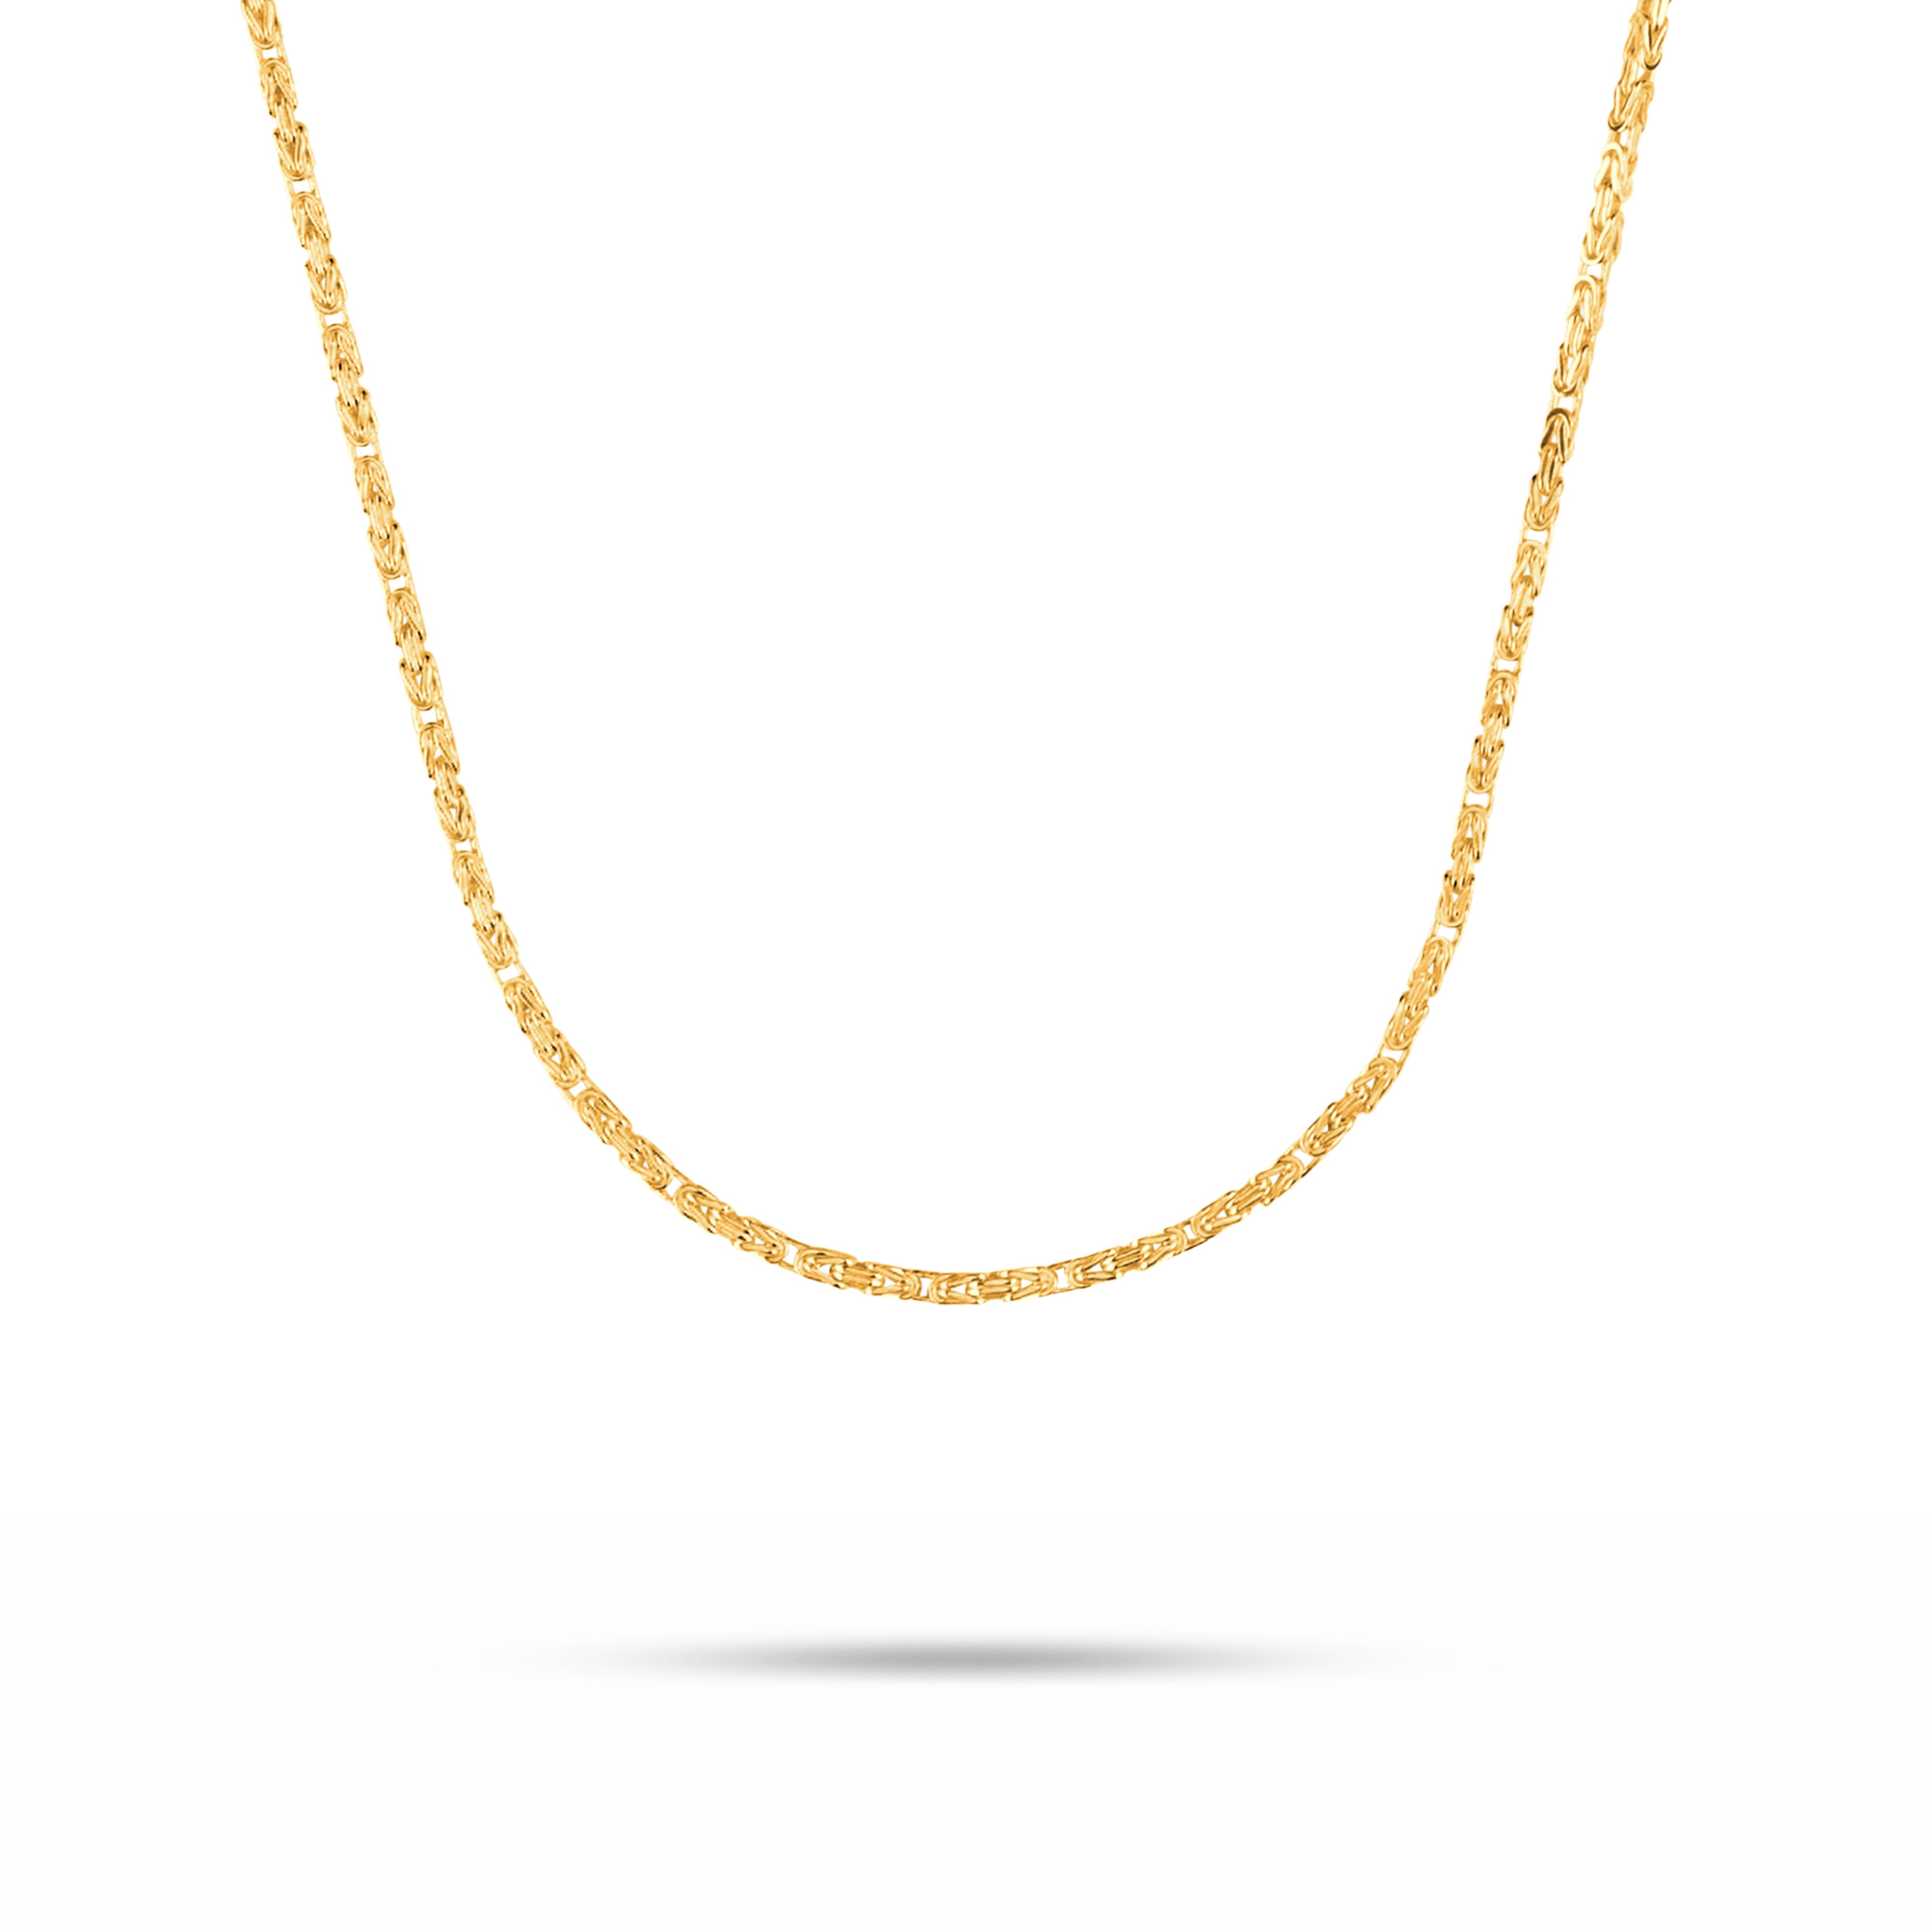 Byzantine chain 2.5mm wide - 585 gold - solid